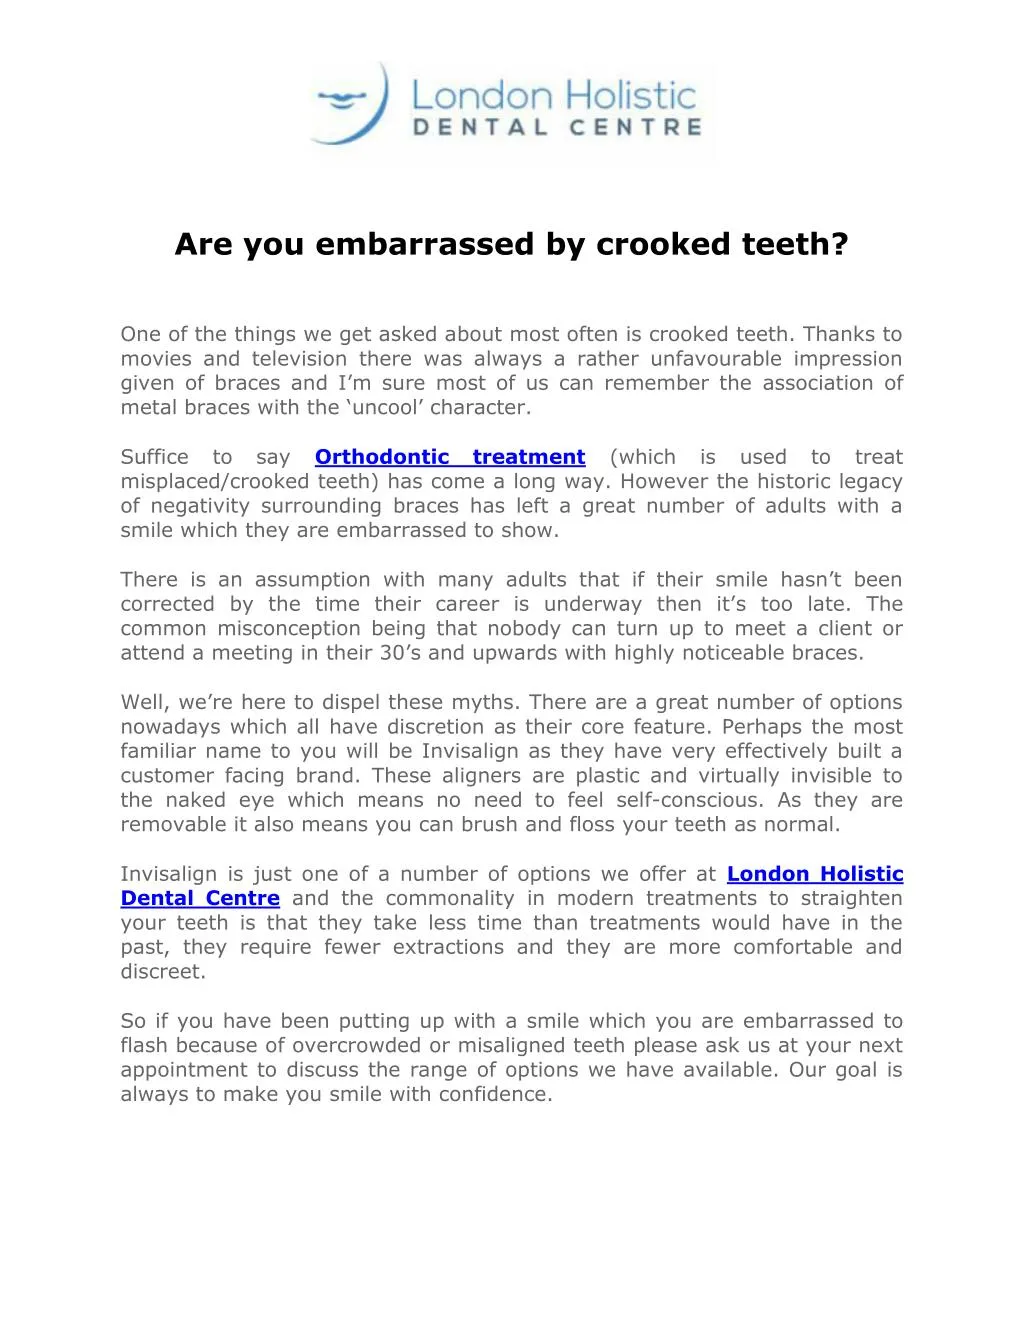 are you embarrassed by crooked teeth